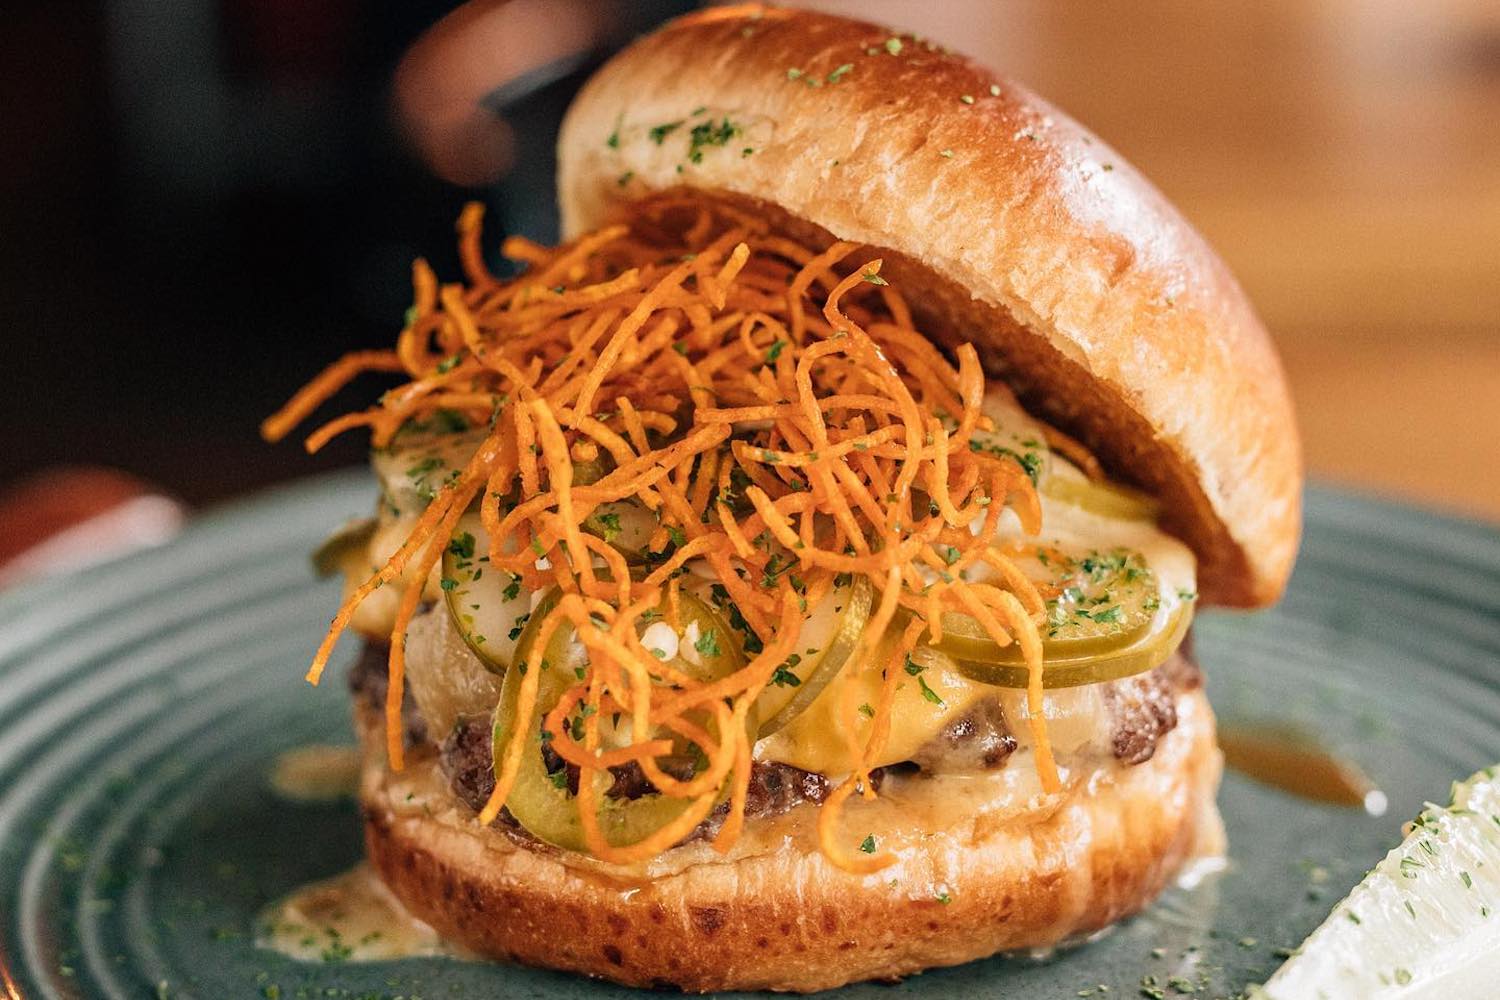 a burger topped with pickles and cheese